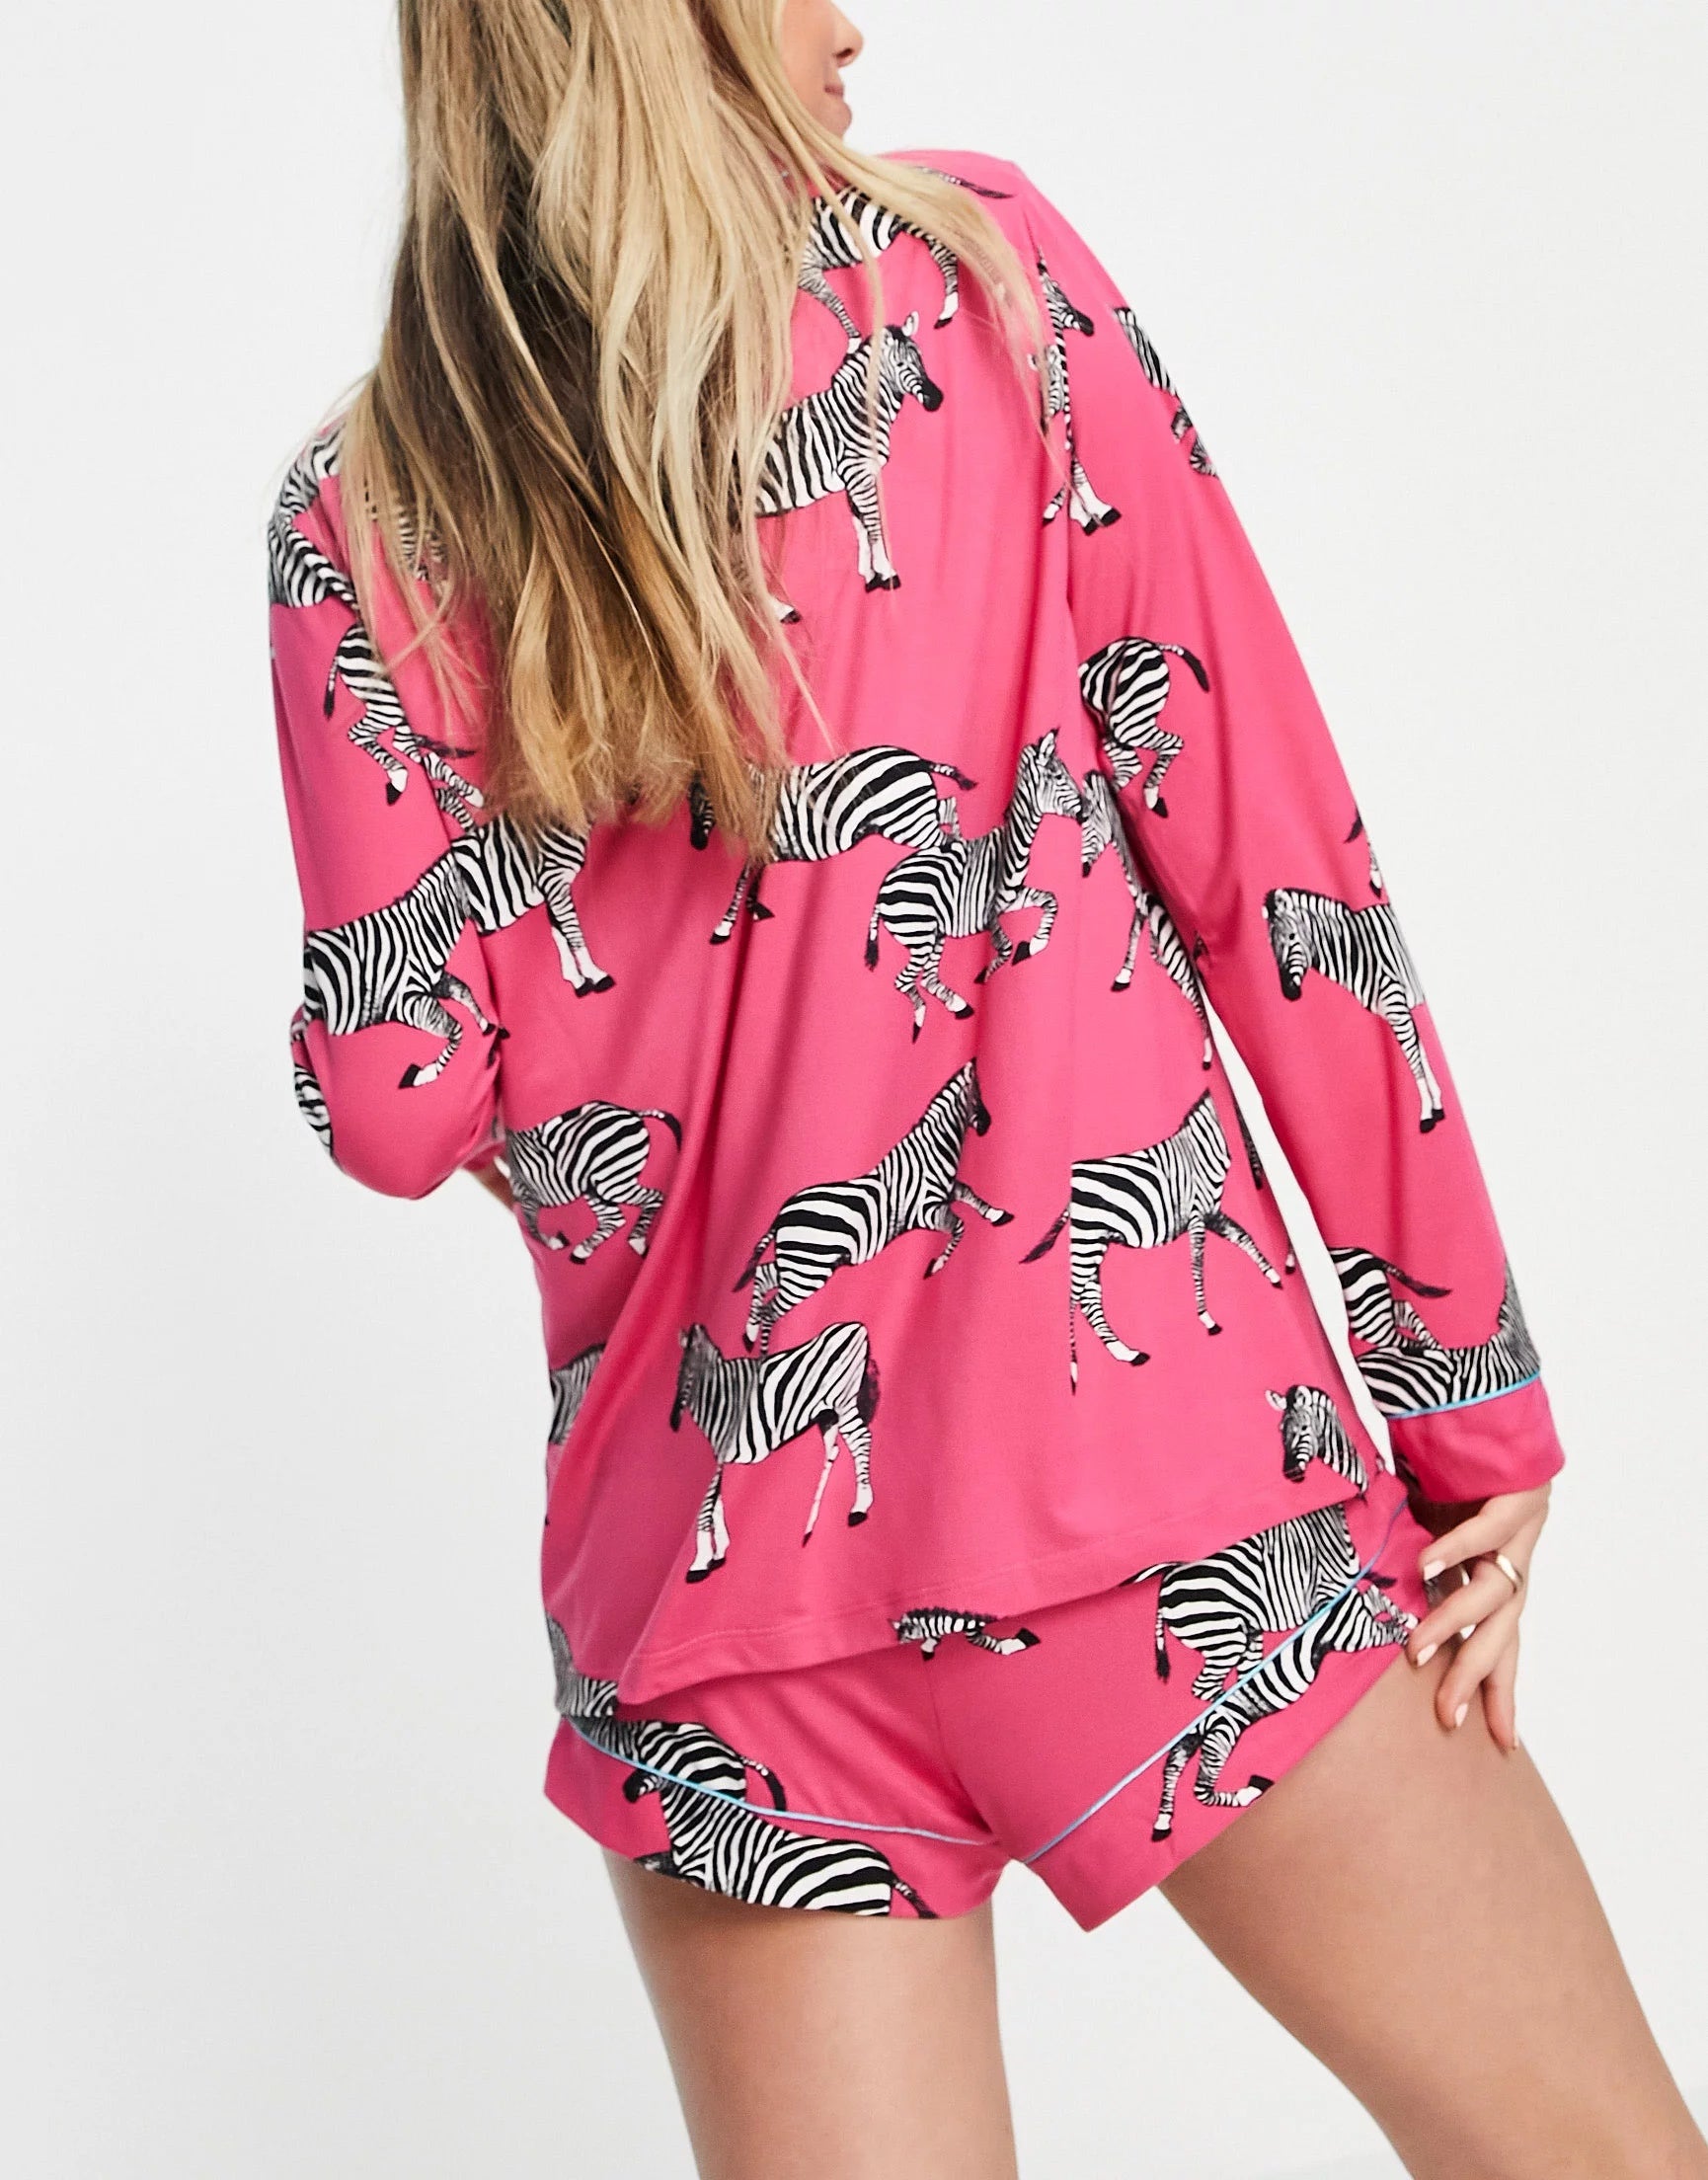 Styleinstant Pink Animal Printed Lounge Wear.